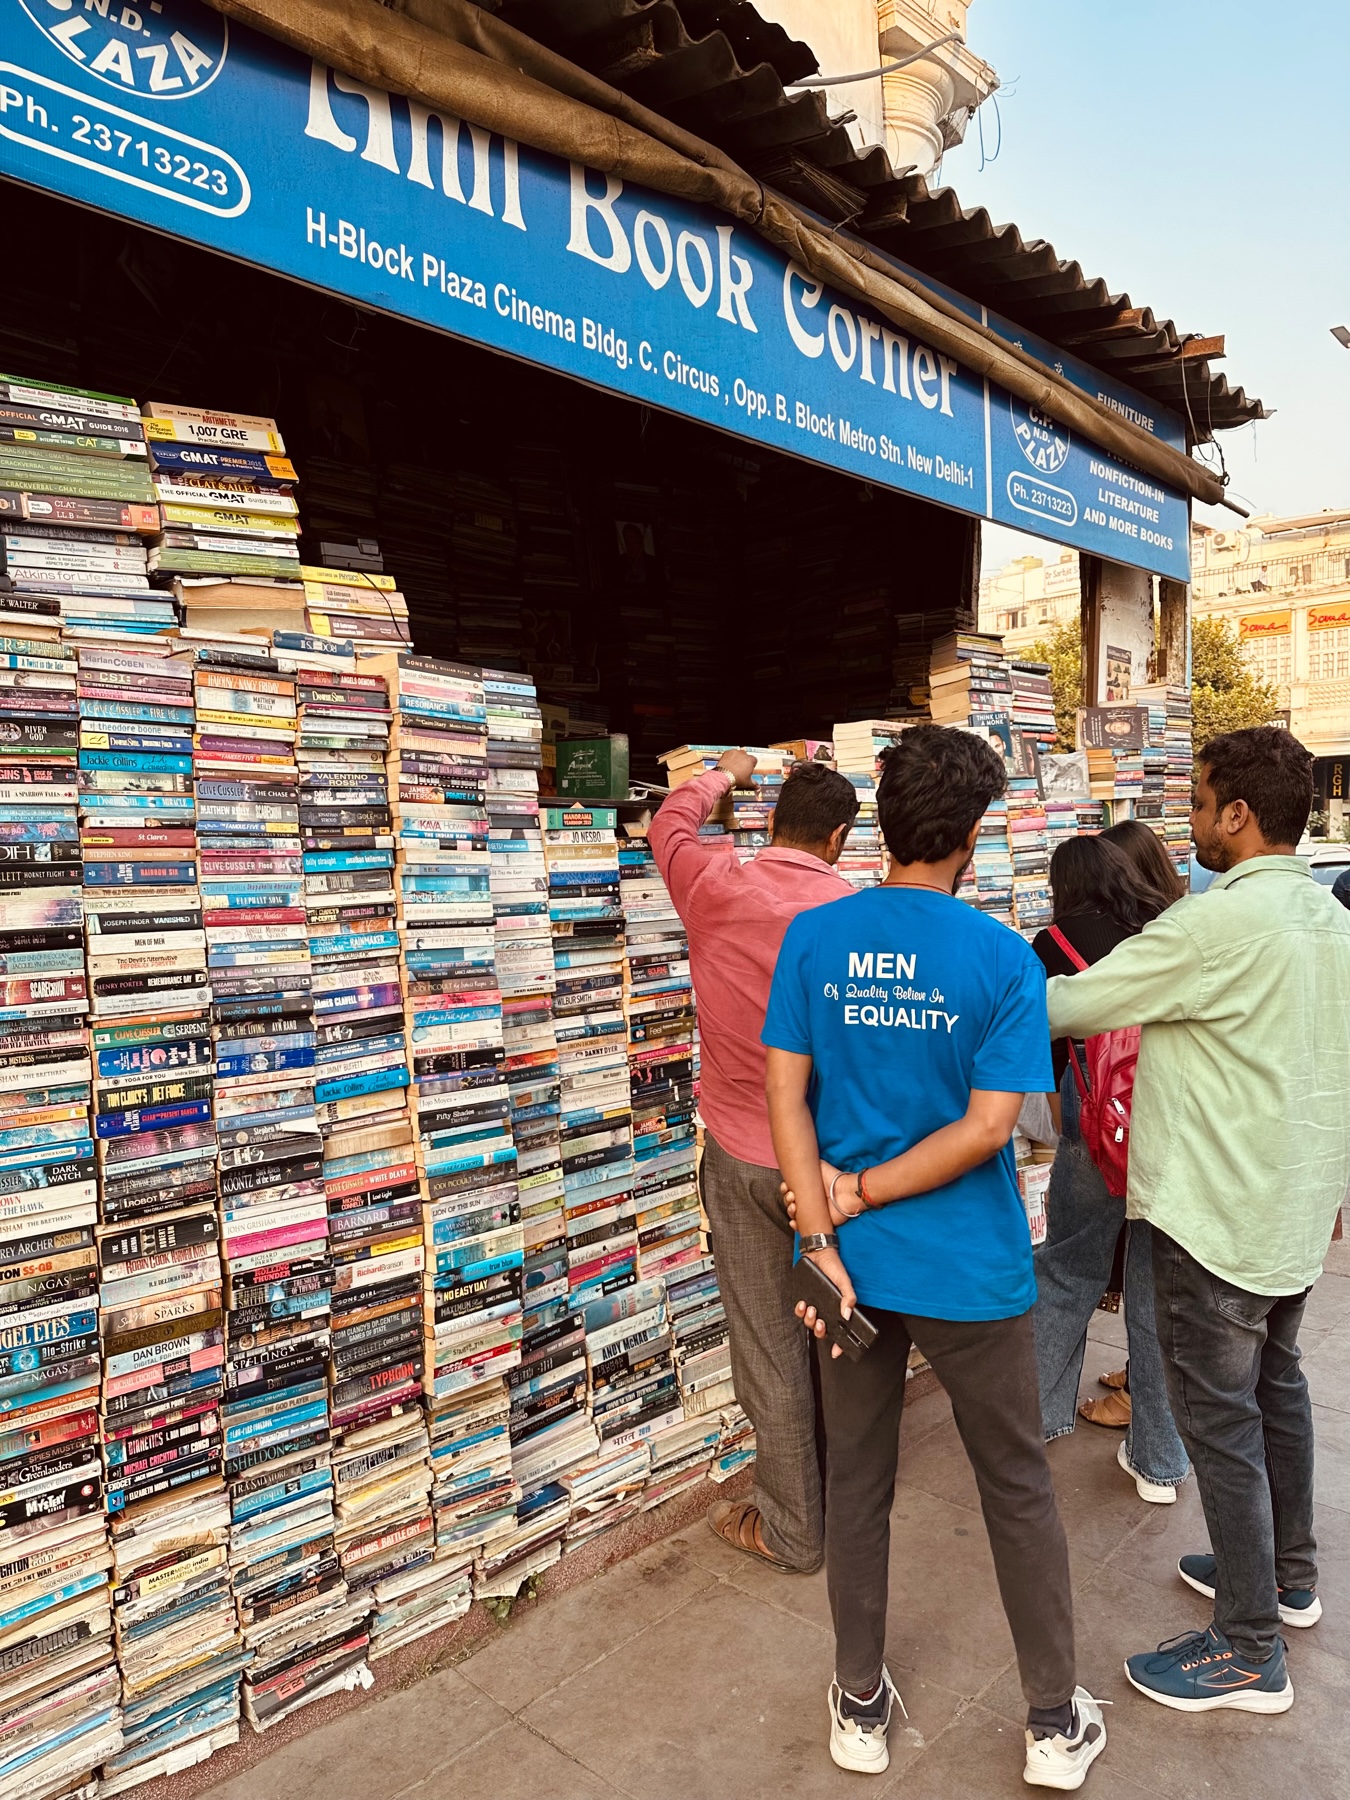 People at a street side bookstore with books piled eight feet high off the ground.